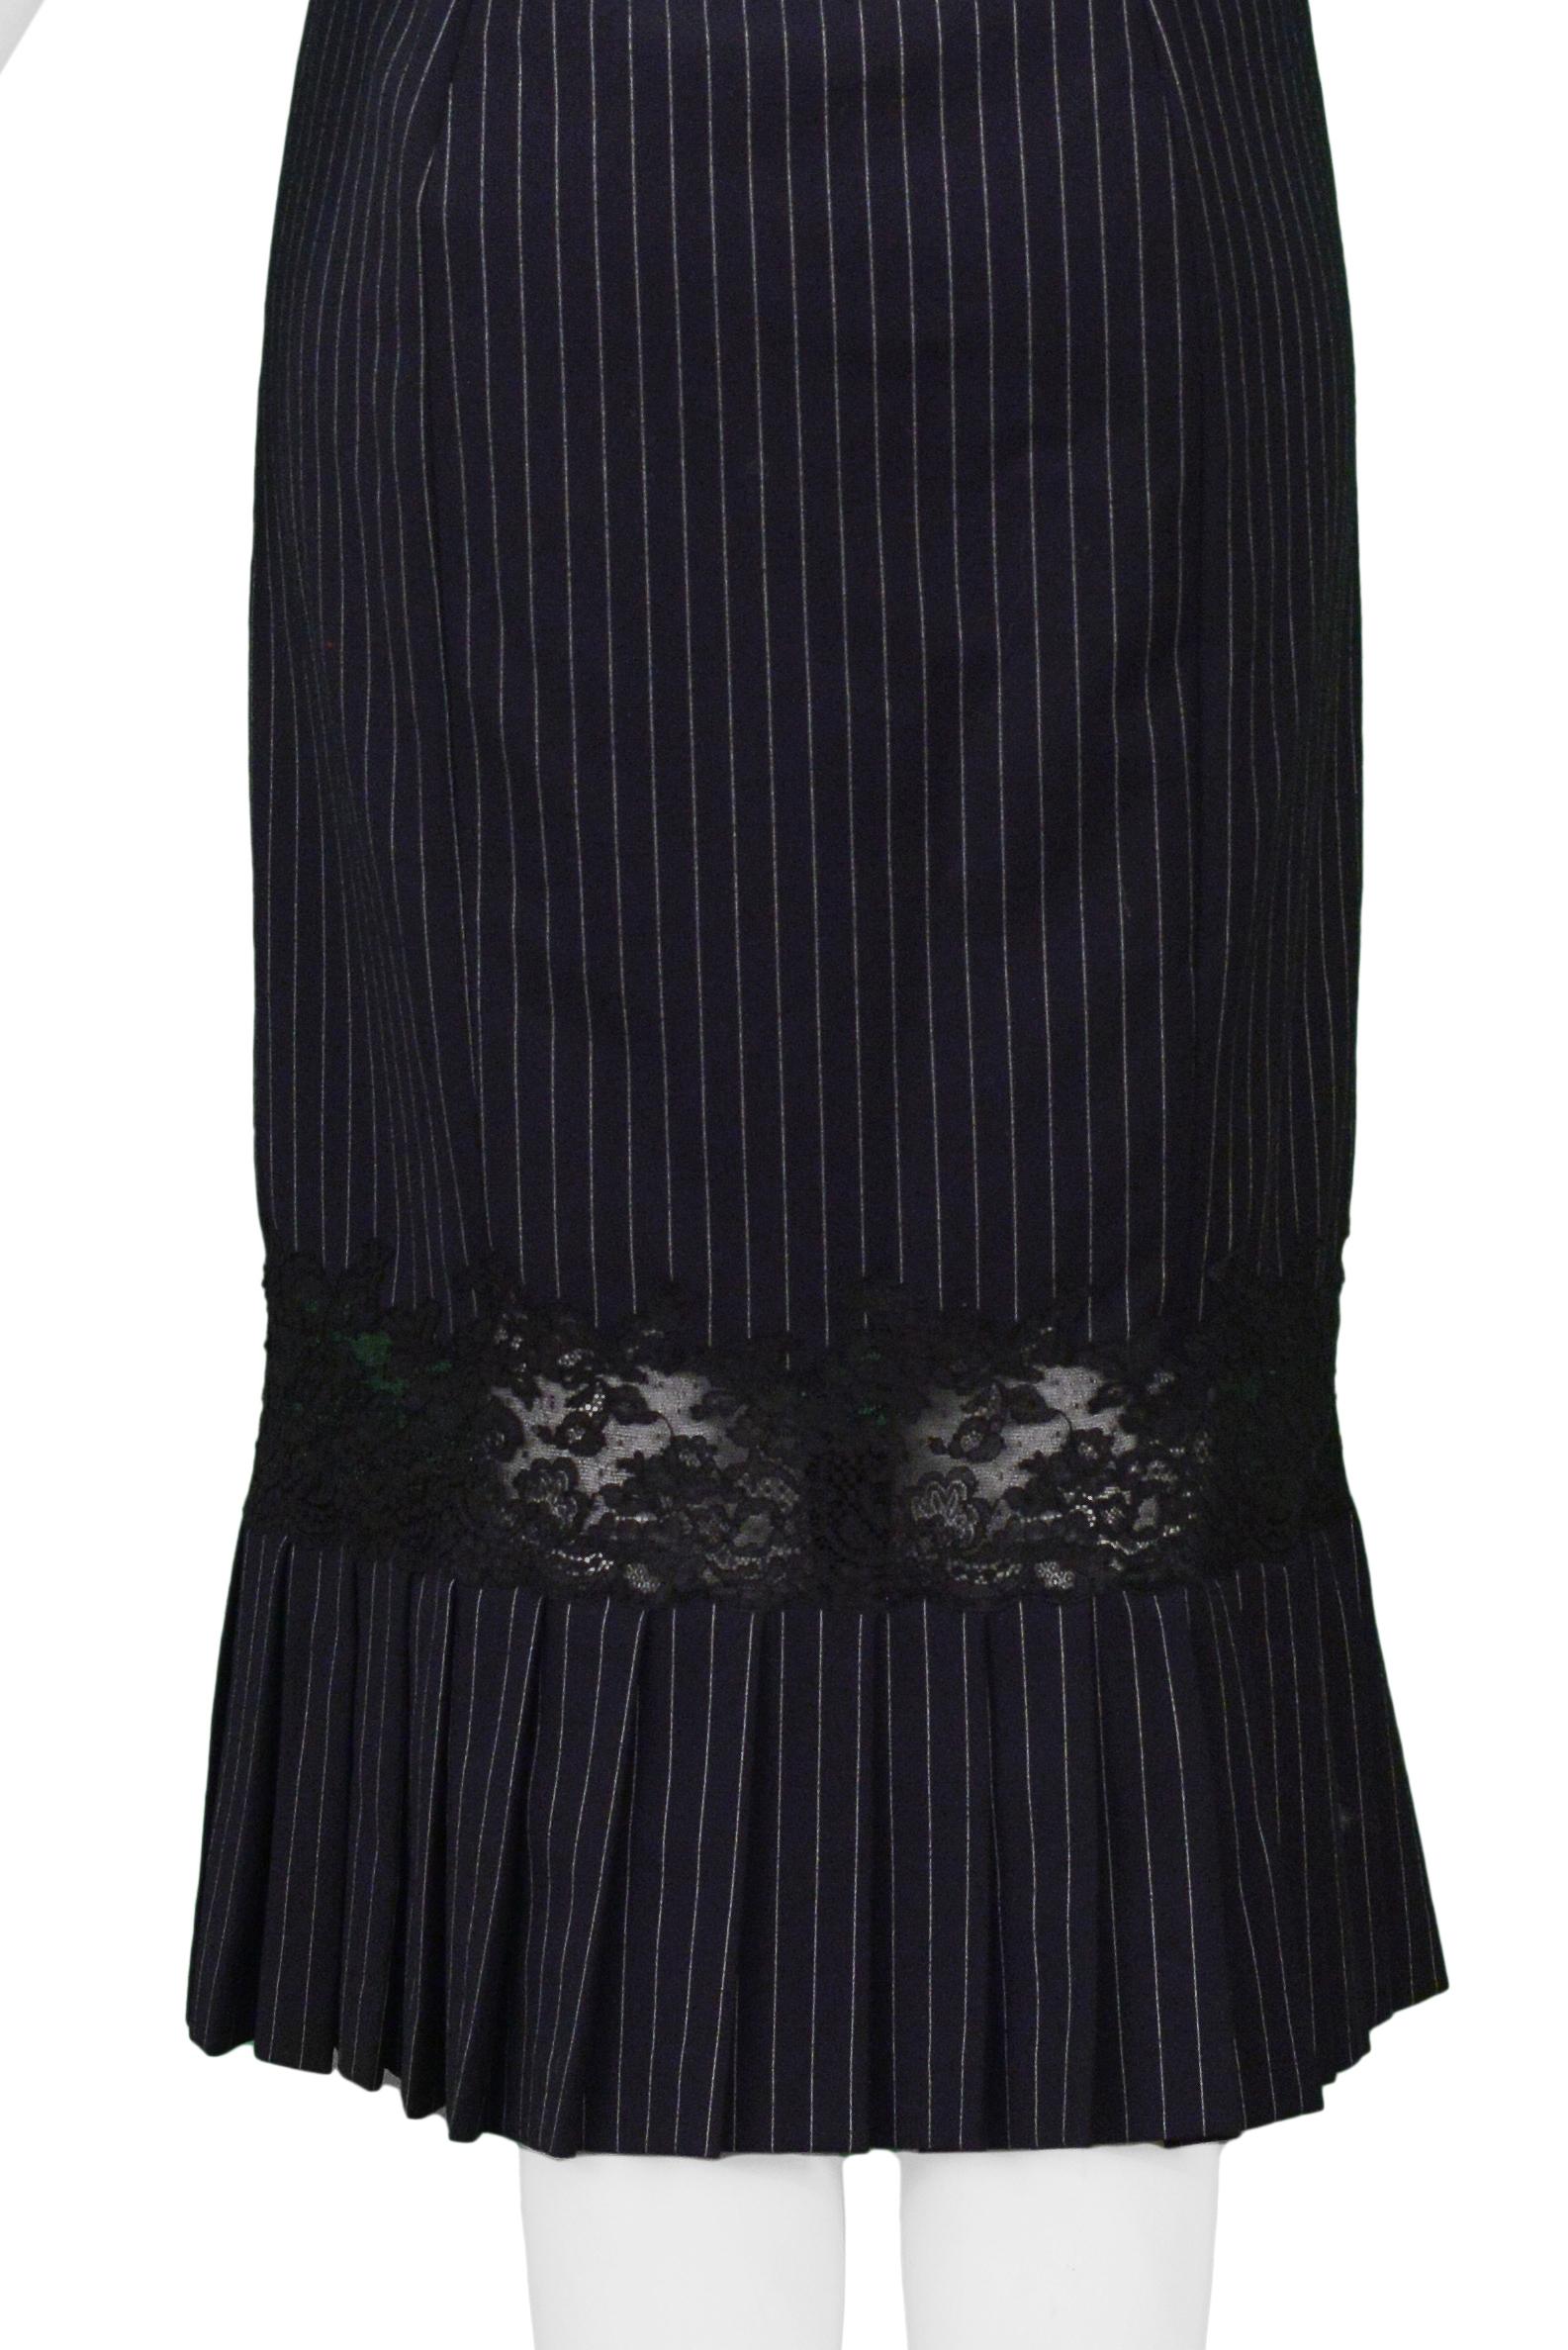 Women's John Galliano Navy Pinstripe Dress With Lace Inset For Sale